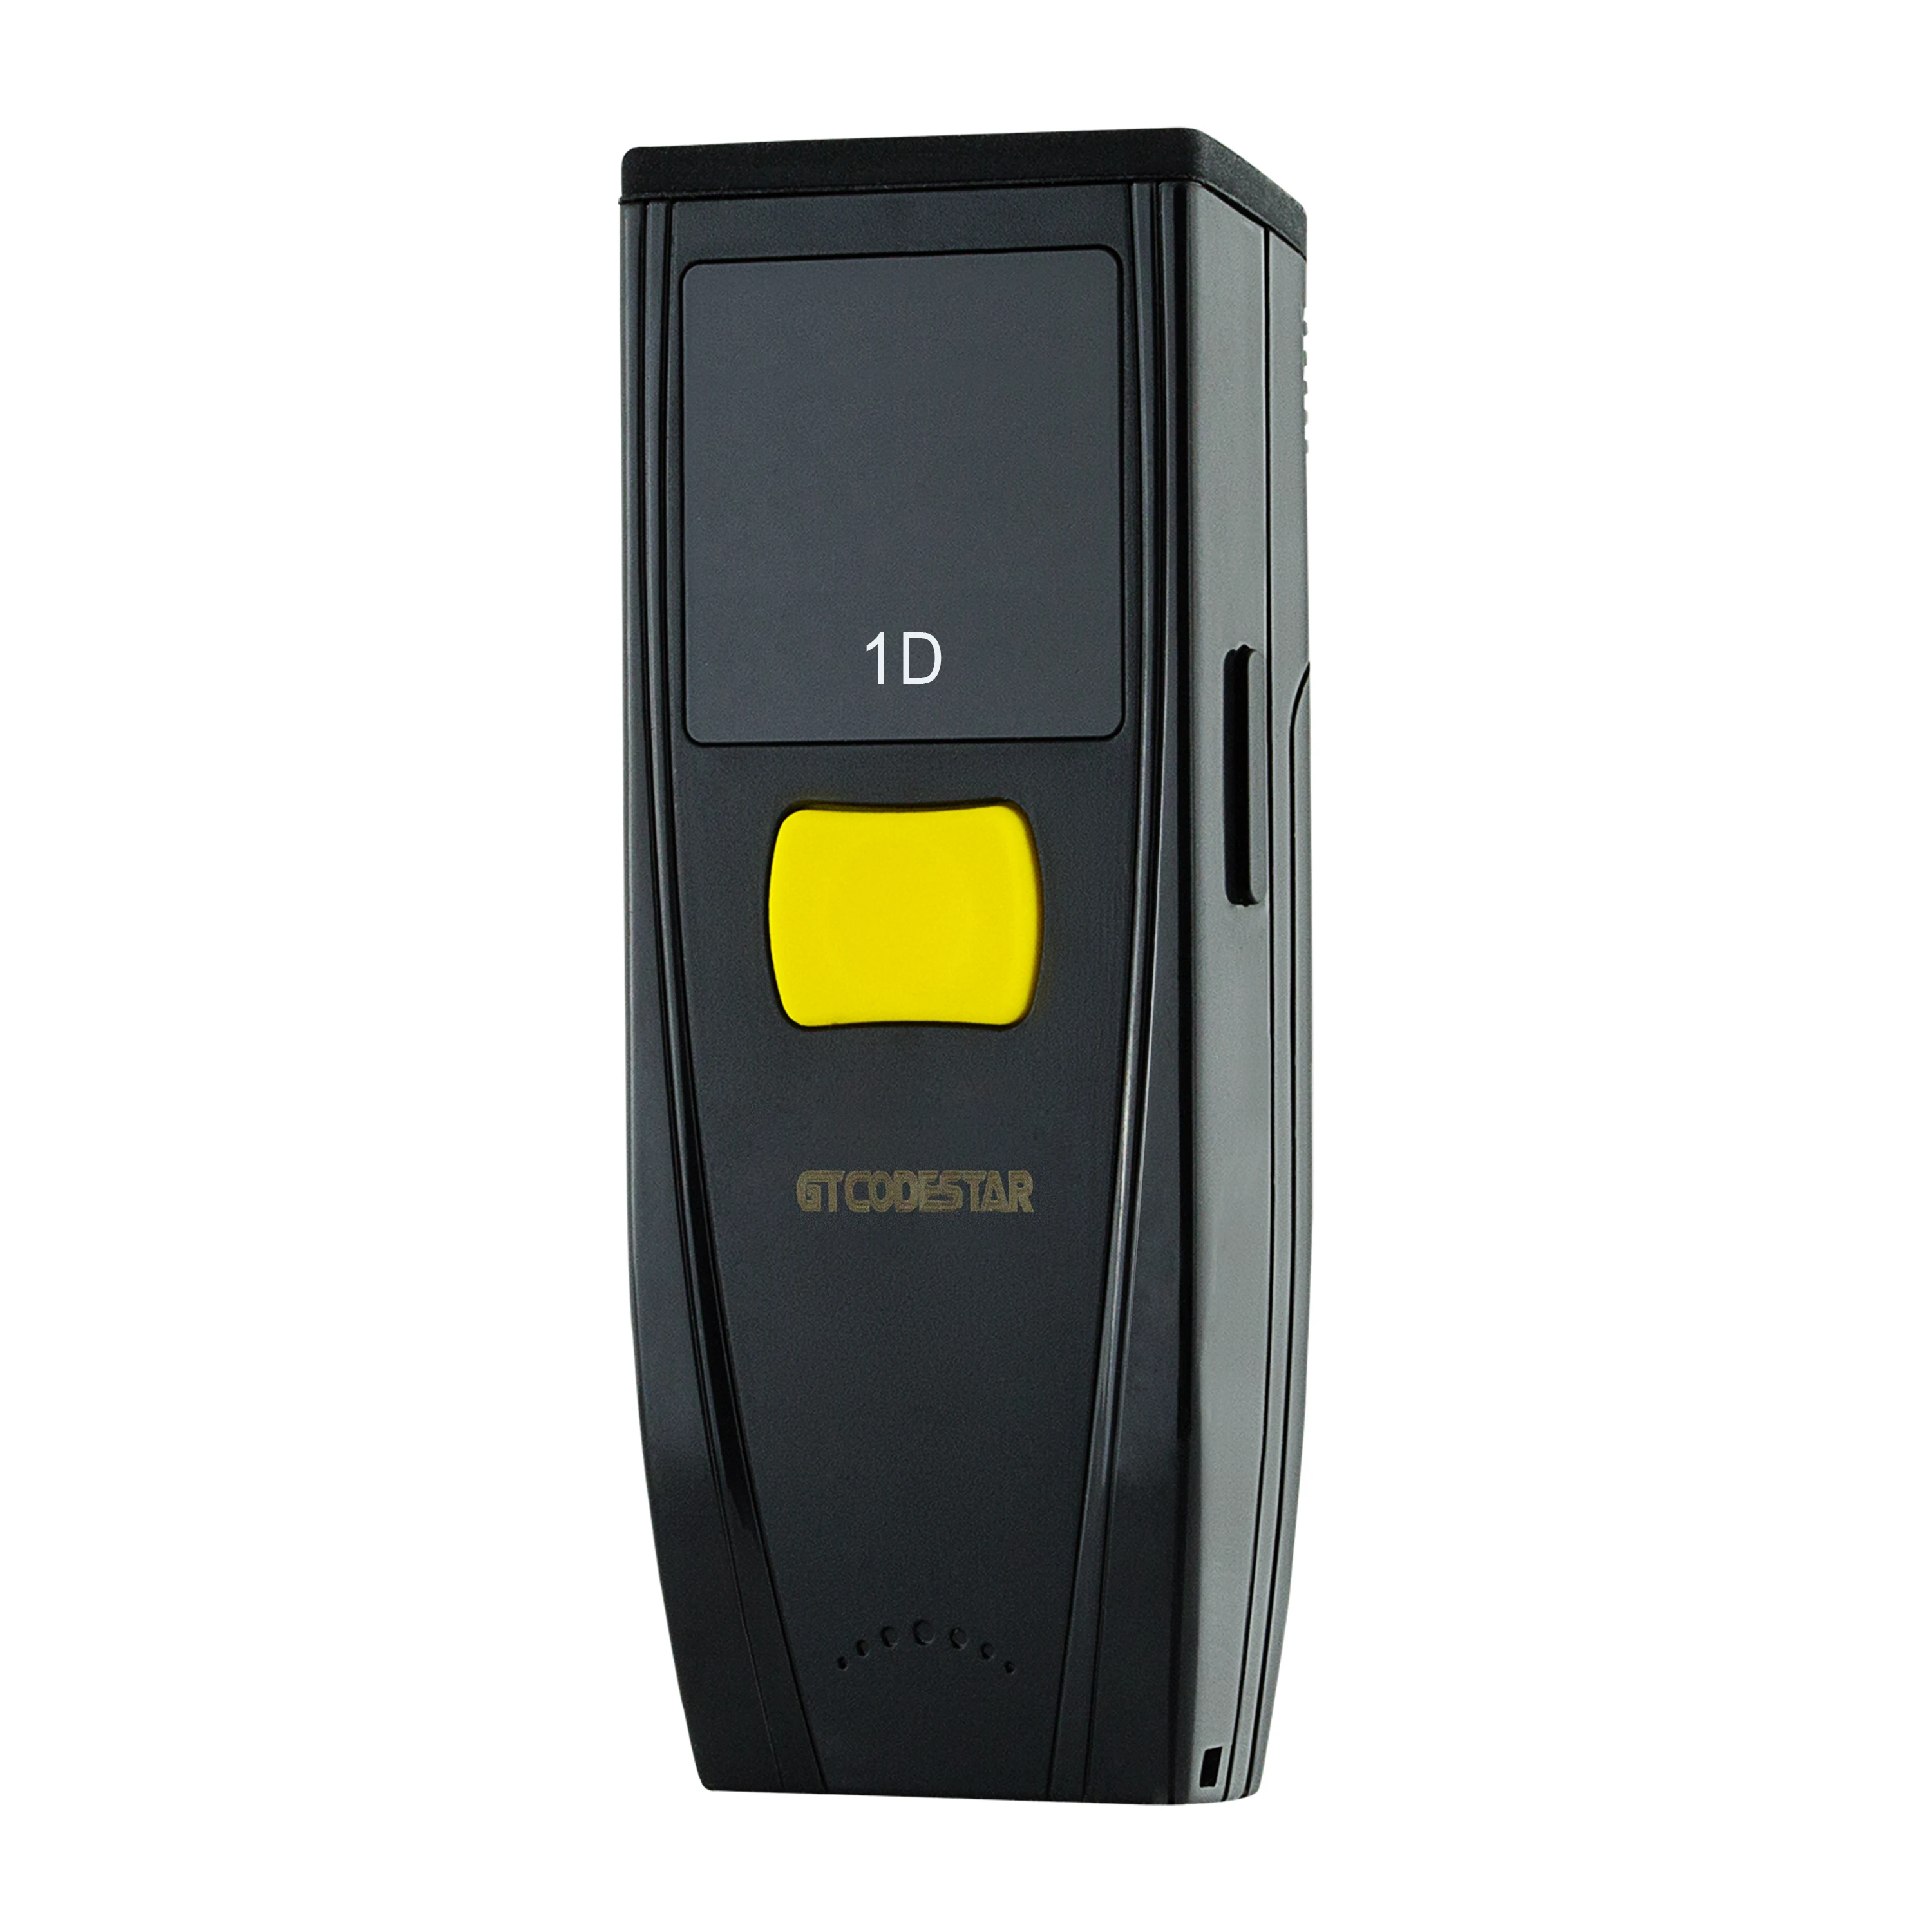 1D Portable Android Handheld Scan with Display bar code scanner